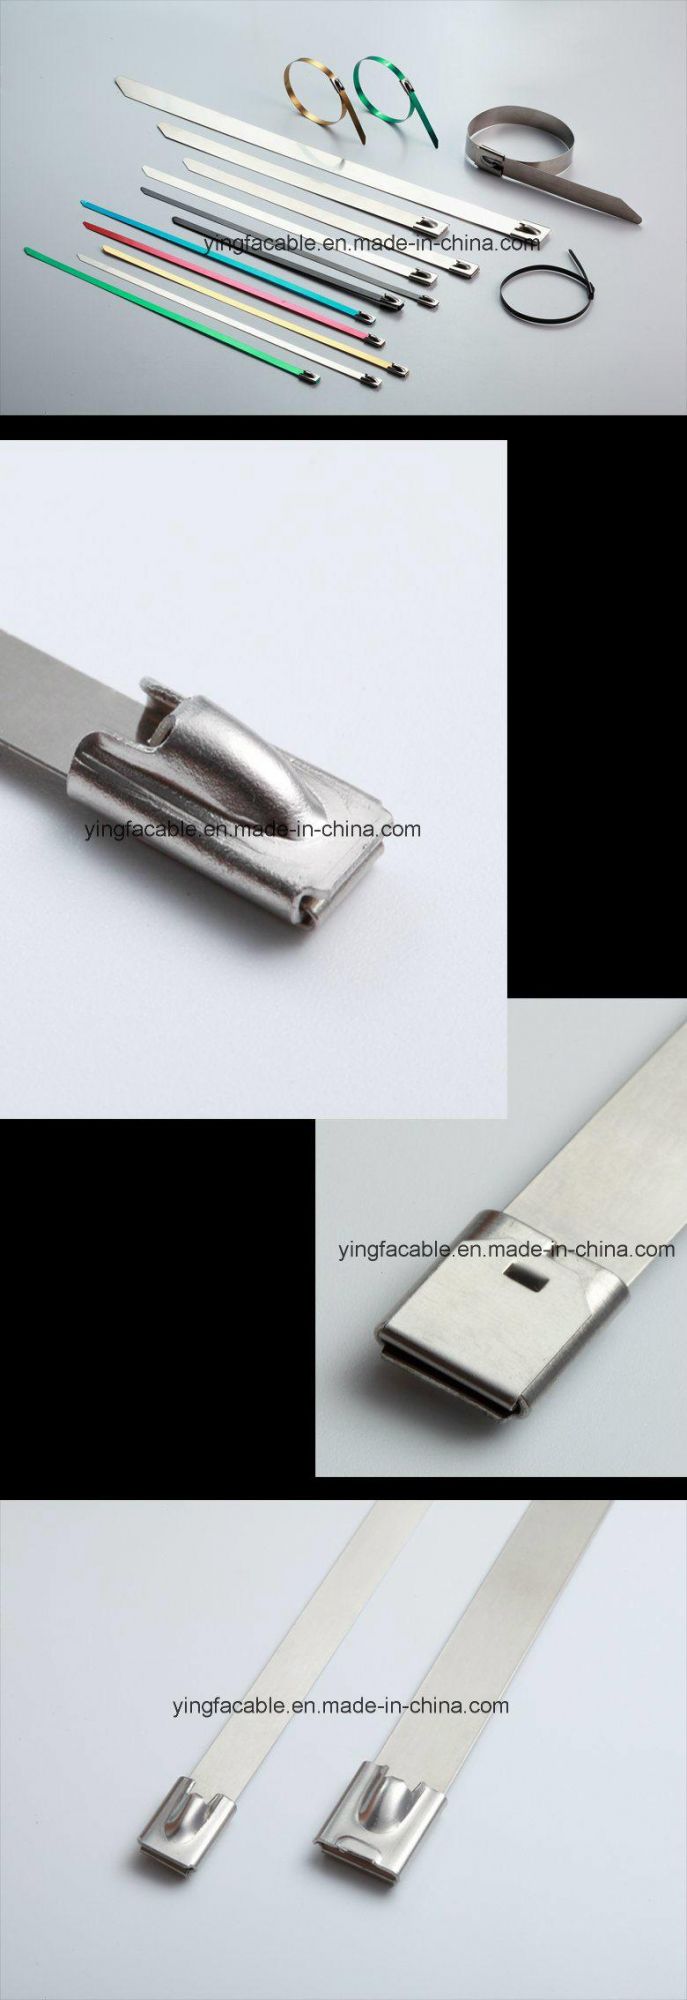 Uncoated Stainless Steel Ties Cable Strap for Industry Application 7.9X250mm